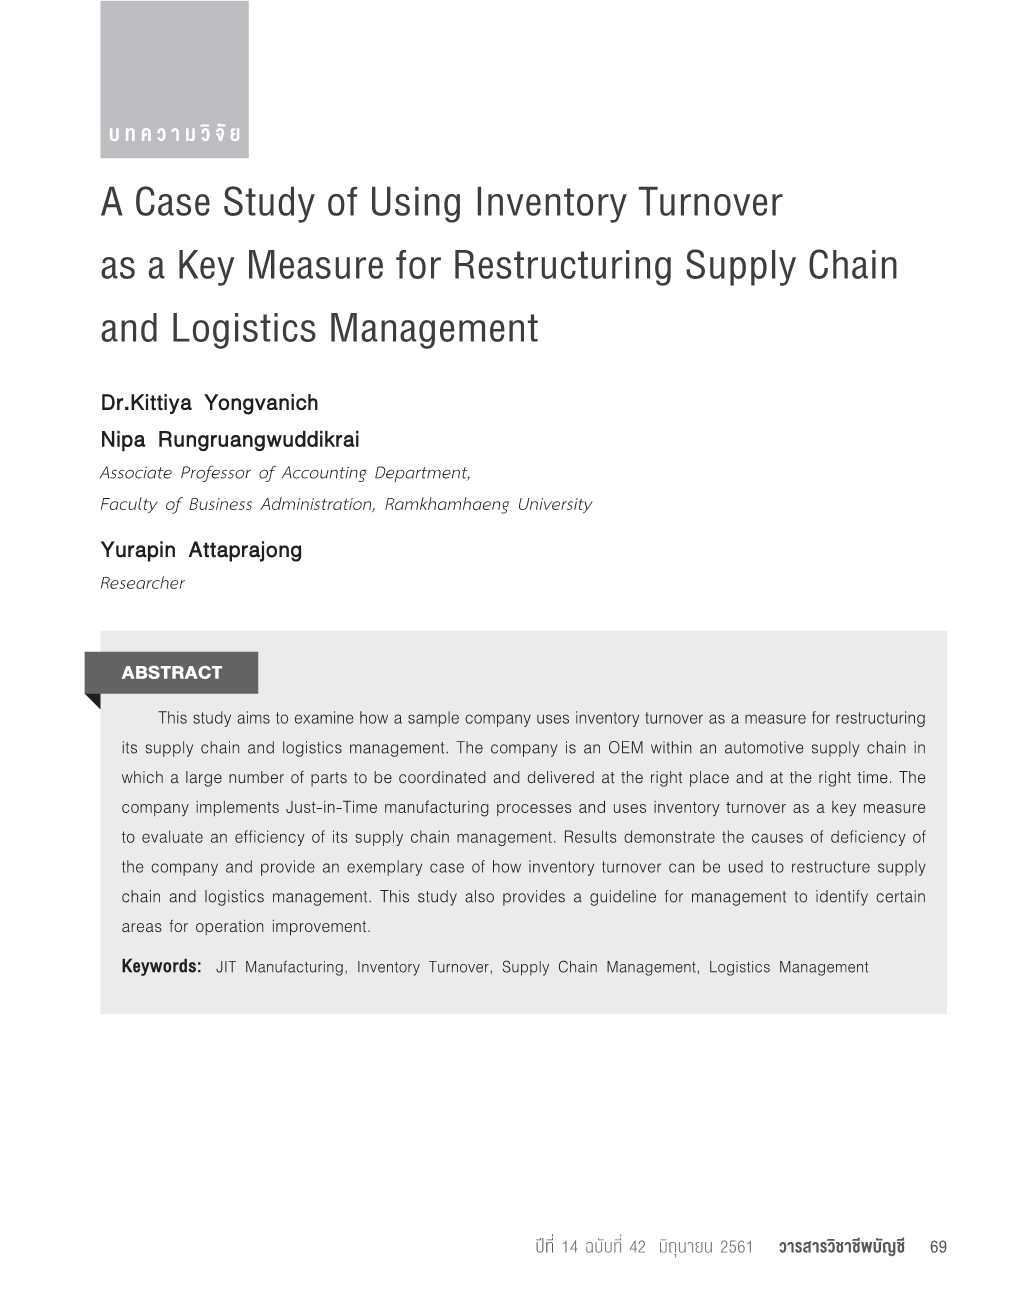 A Case Study of Using Inventory Turnover As a Key Measure For